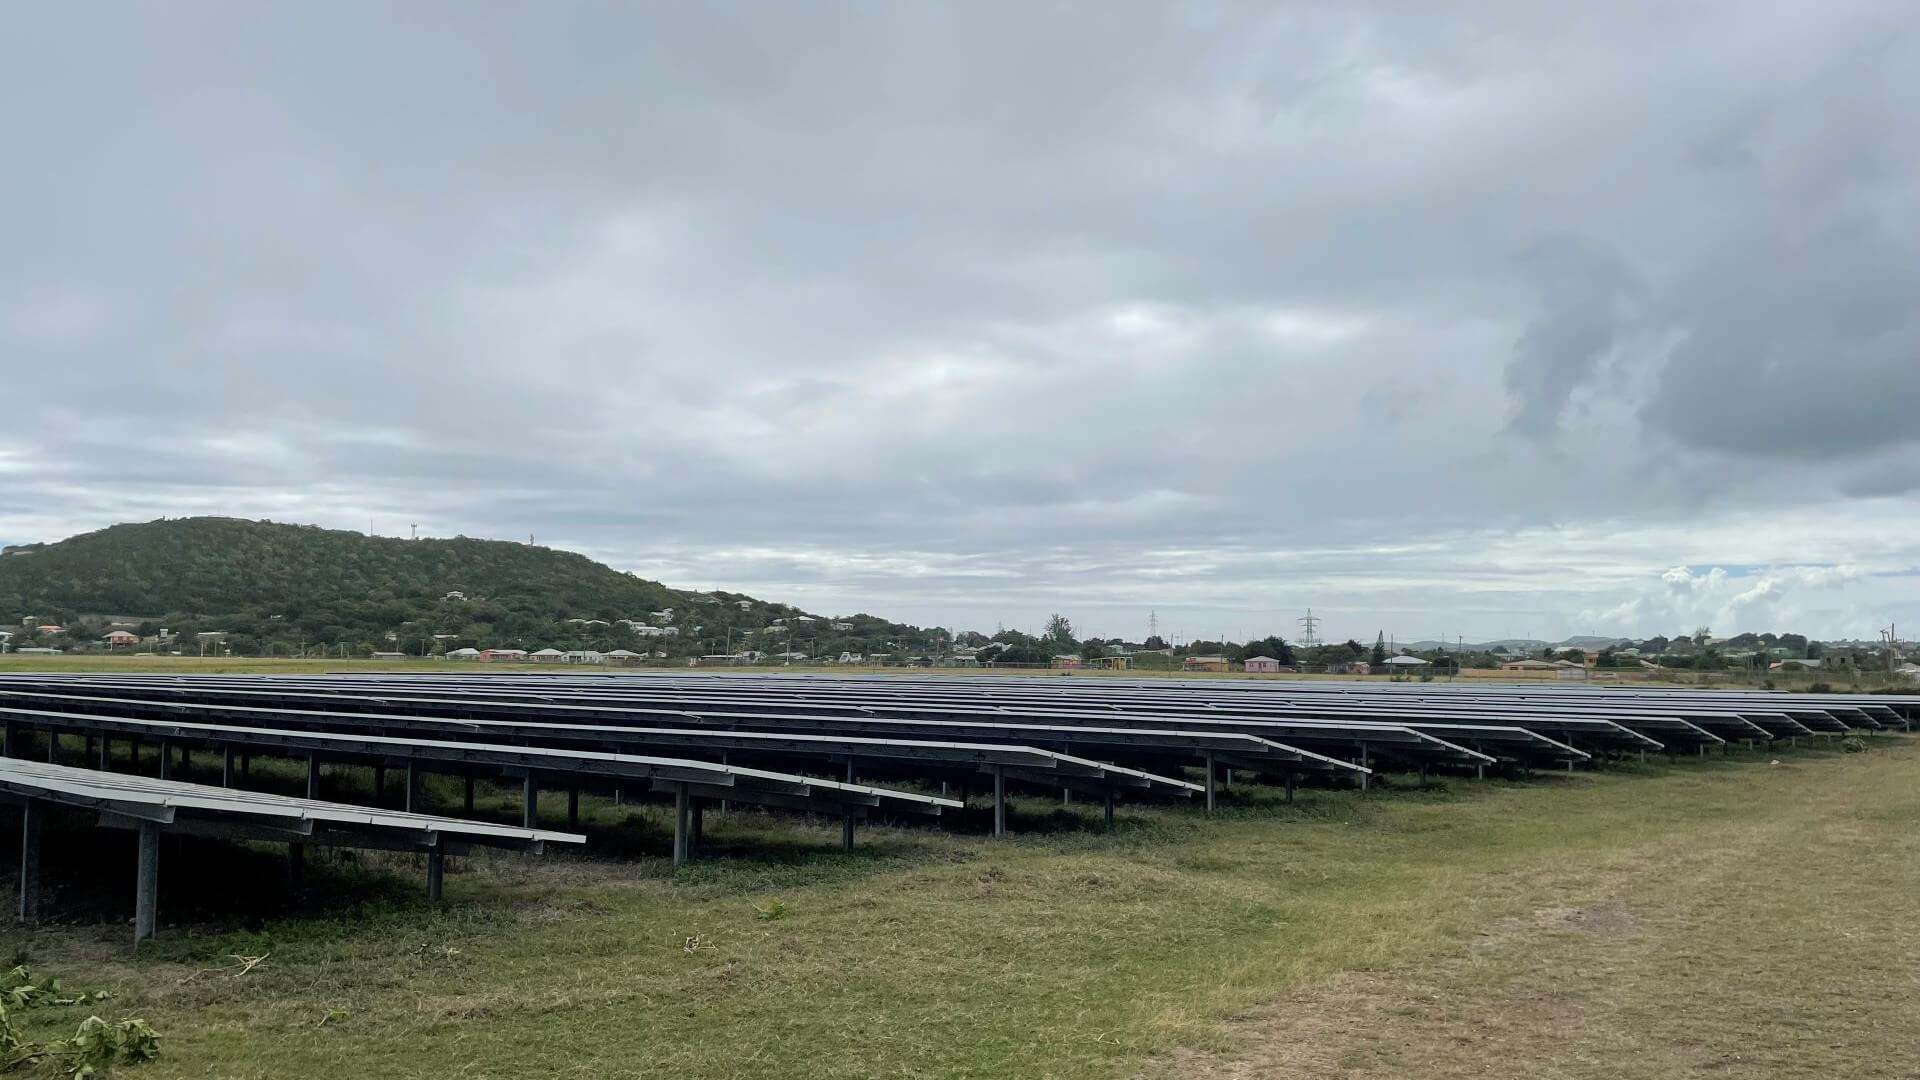 view looking along rows of solar panels